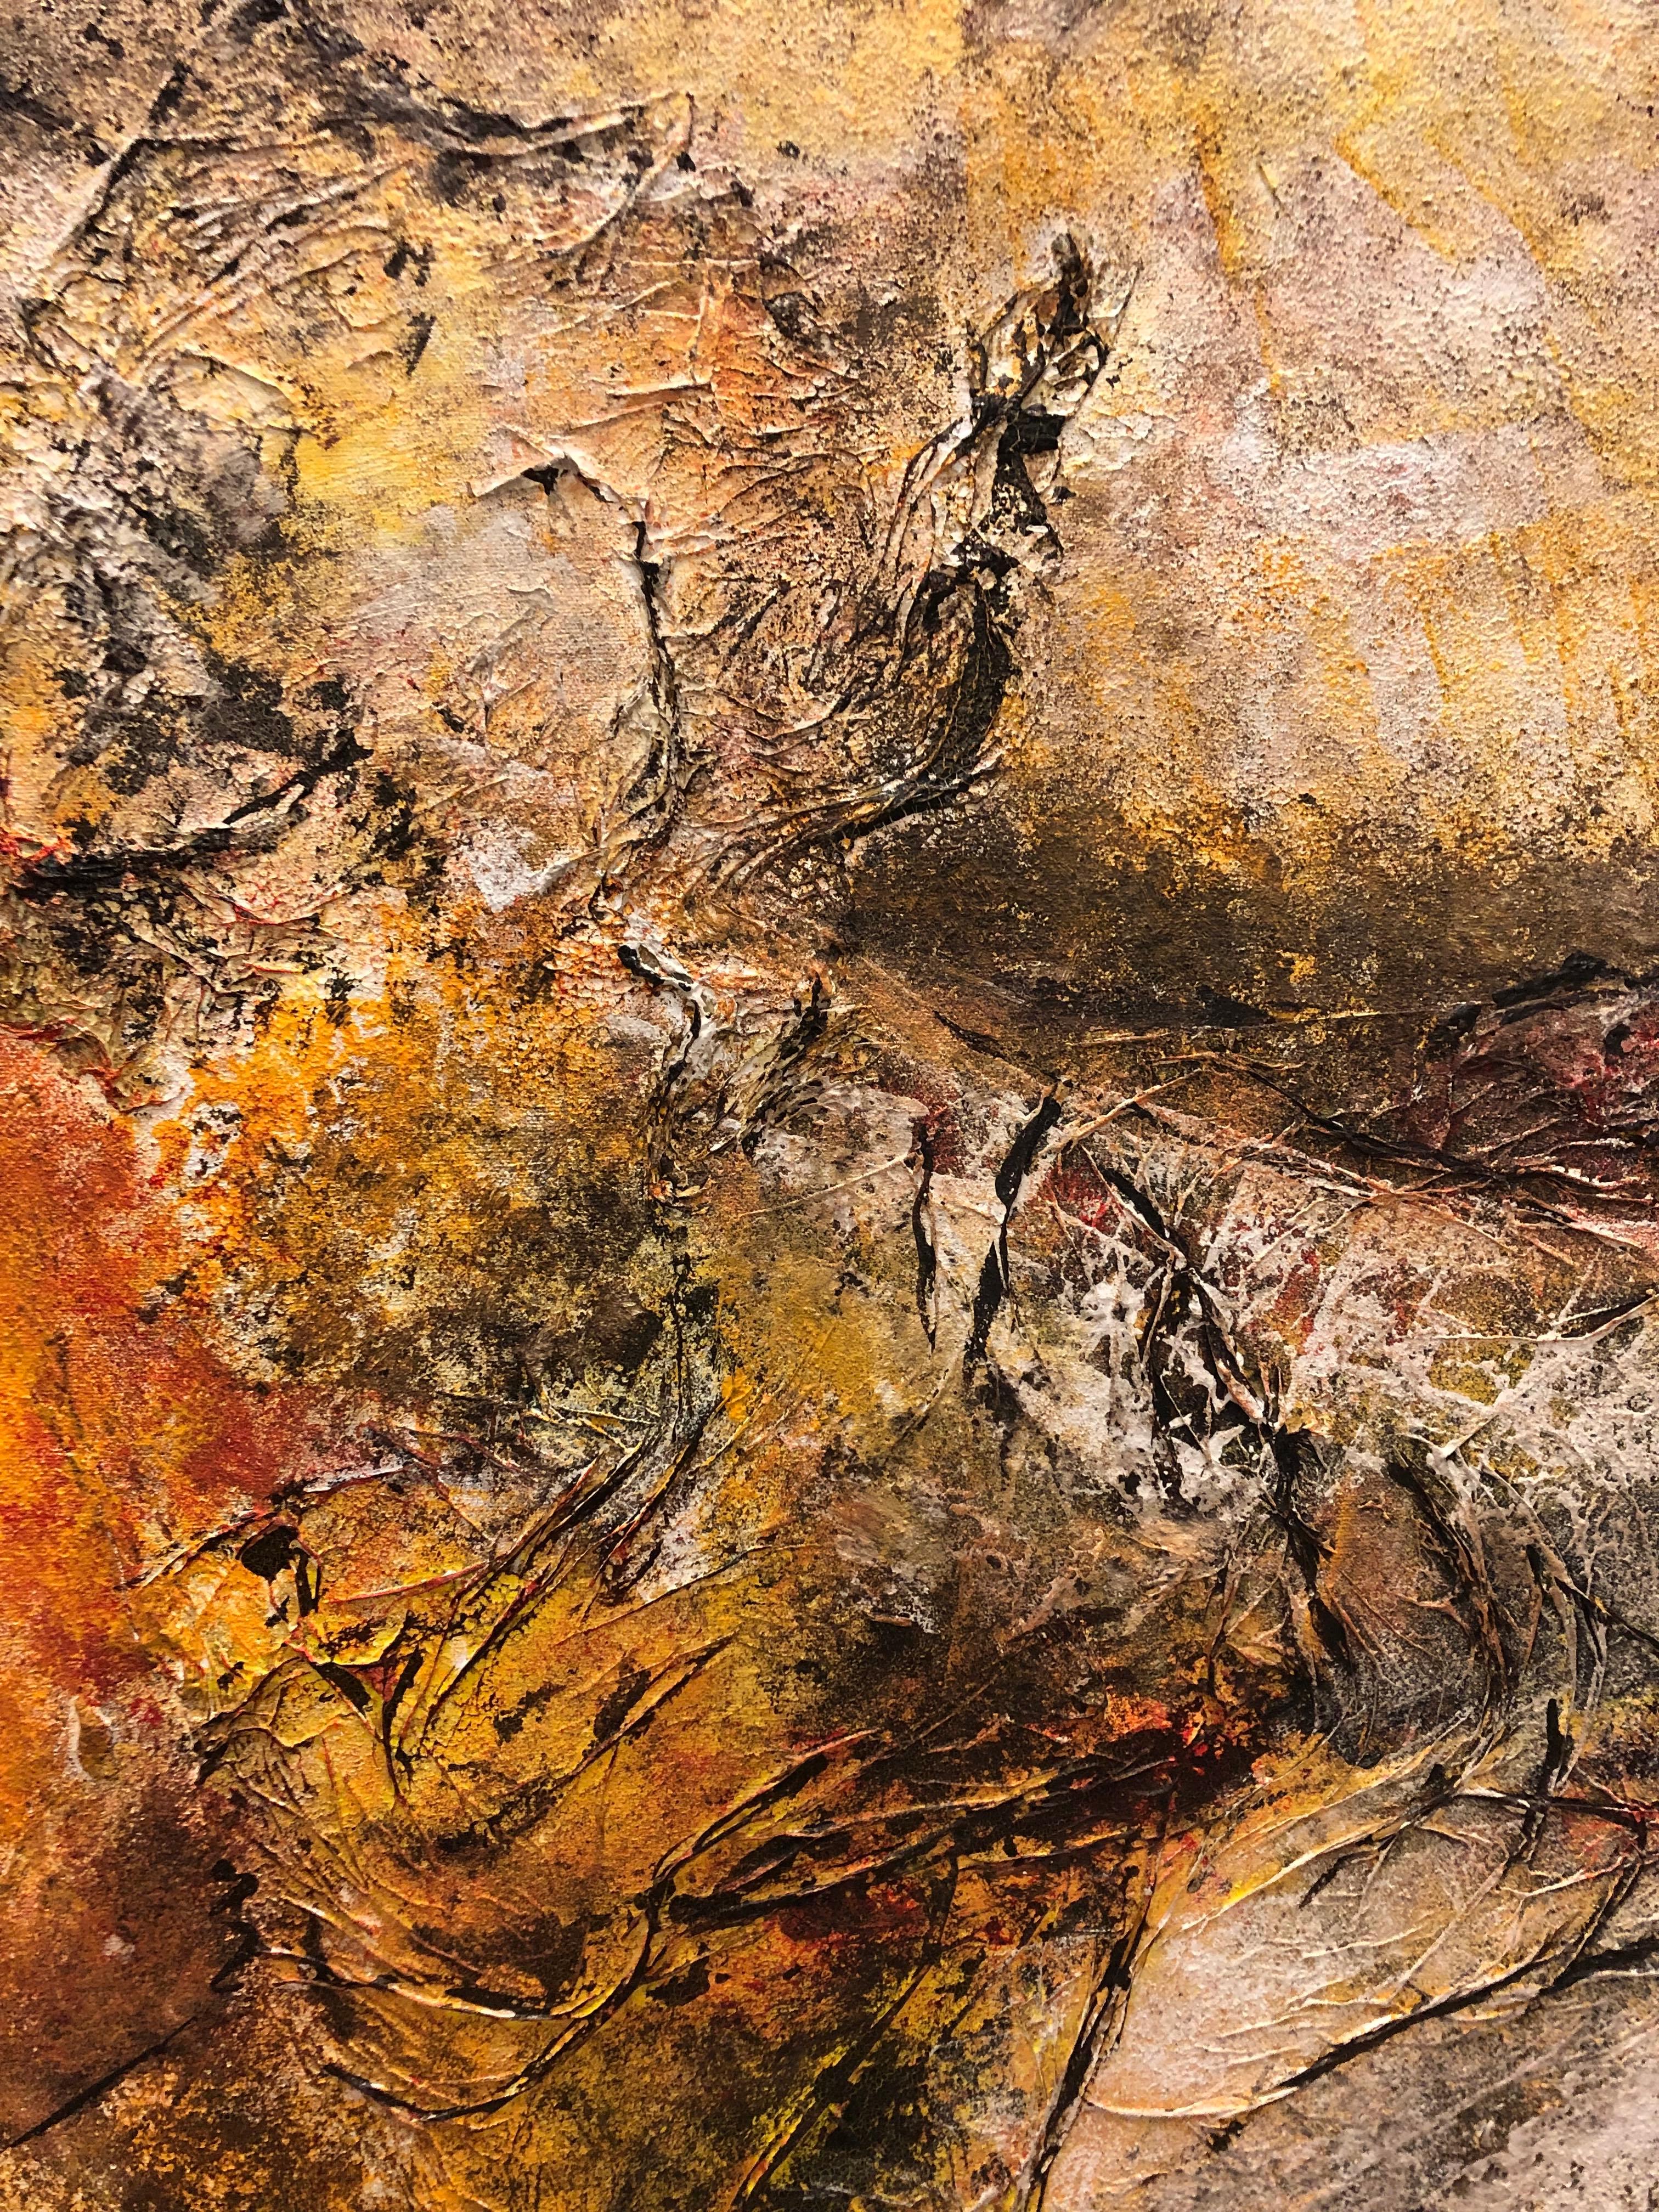 Textural abstract landscape painting by Moroccan artist Wafaa Mezouar.  Earth tones, Acrylic, mixed media on linen. 

Size: 40 x 40 inches. Offered unframed.

Exhibitions include: Contemporary Salon of National Art, Casablanca, Morocco, Galerie le